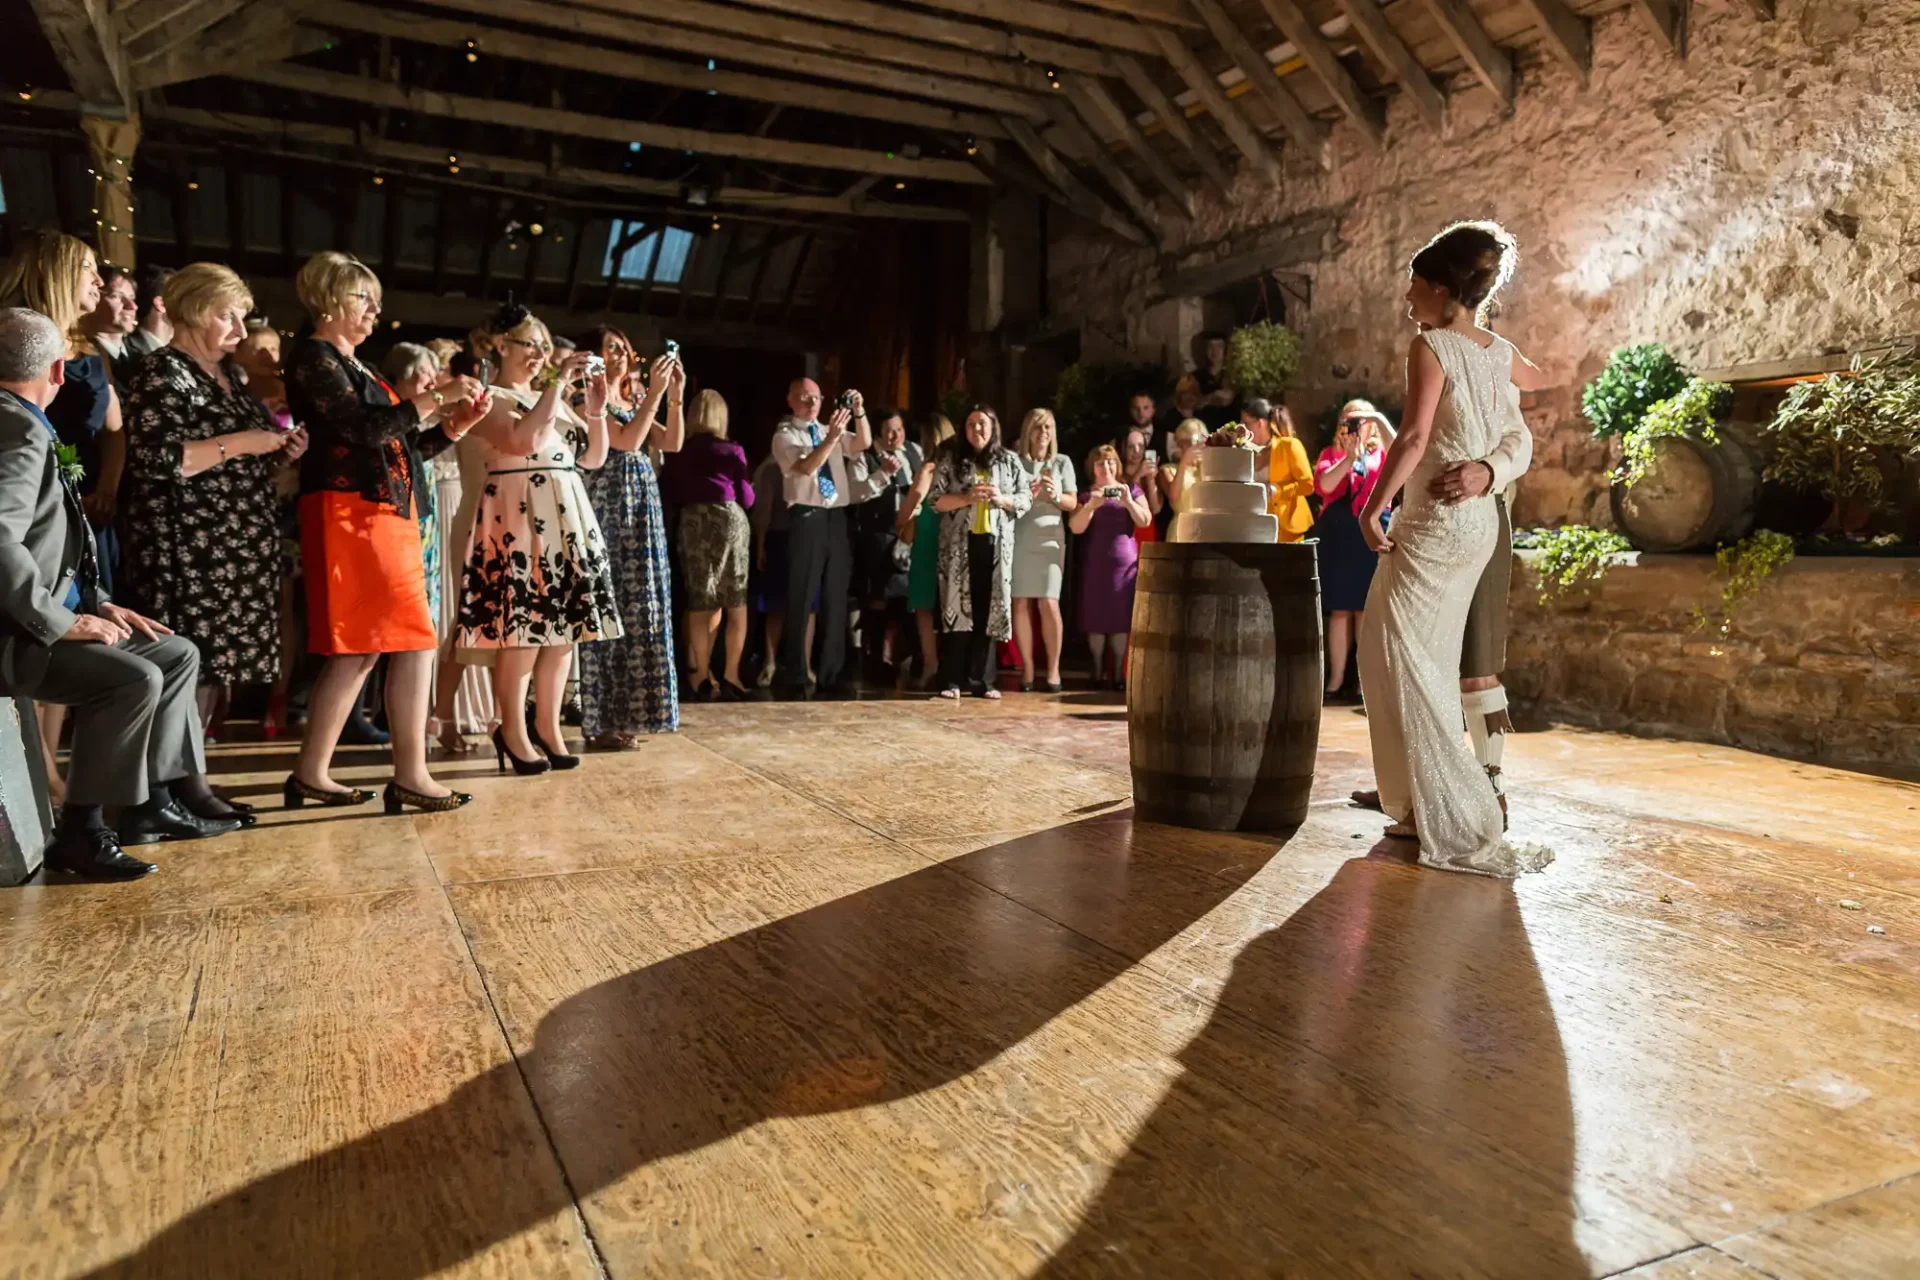 A happy bride and groom standing next to a colorful cake, surrounded by applauding guests in a warmly-lit barn.